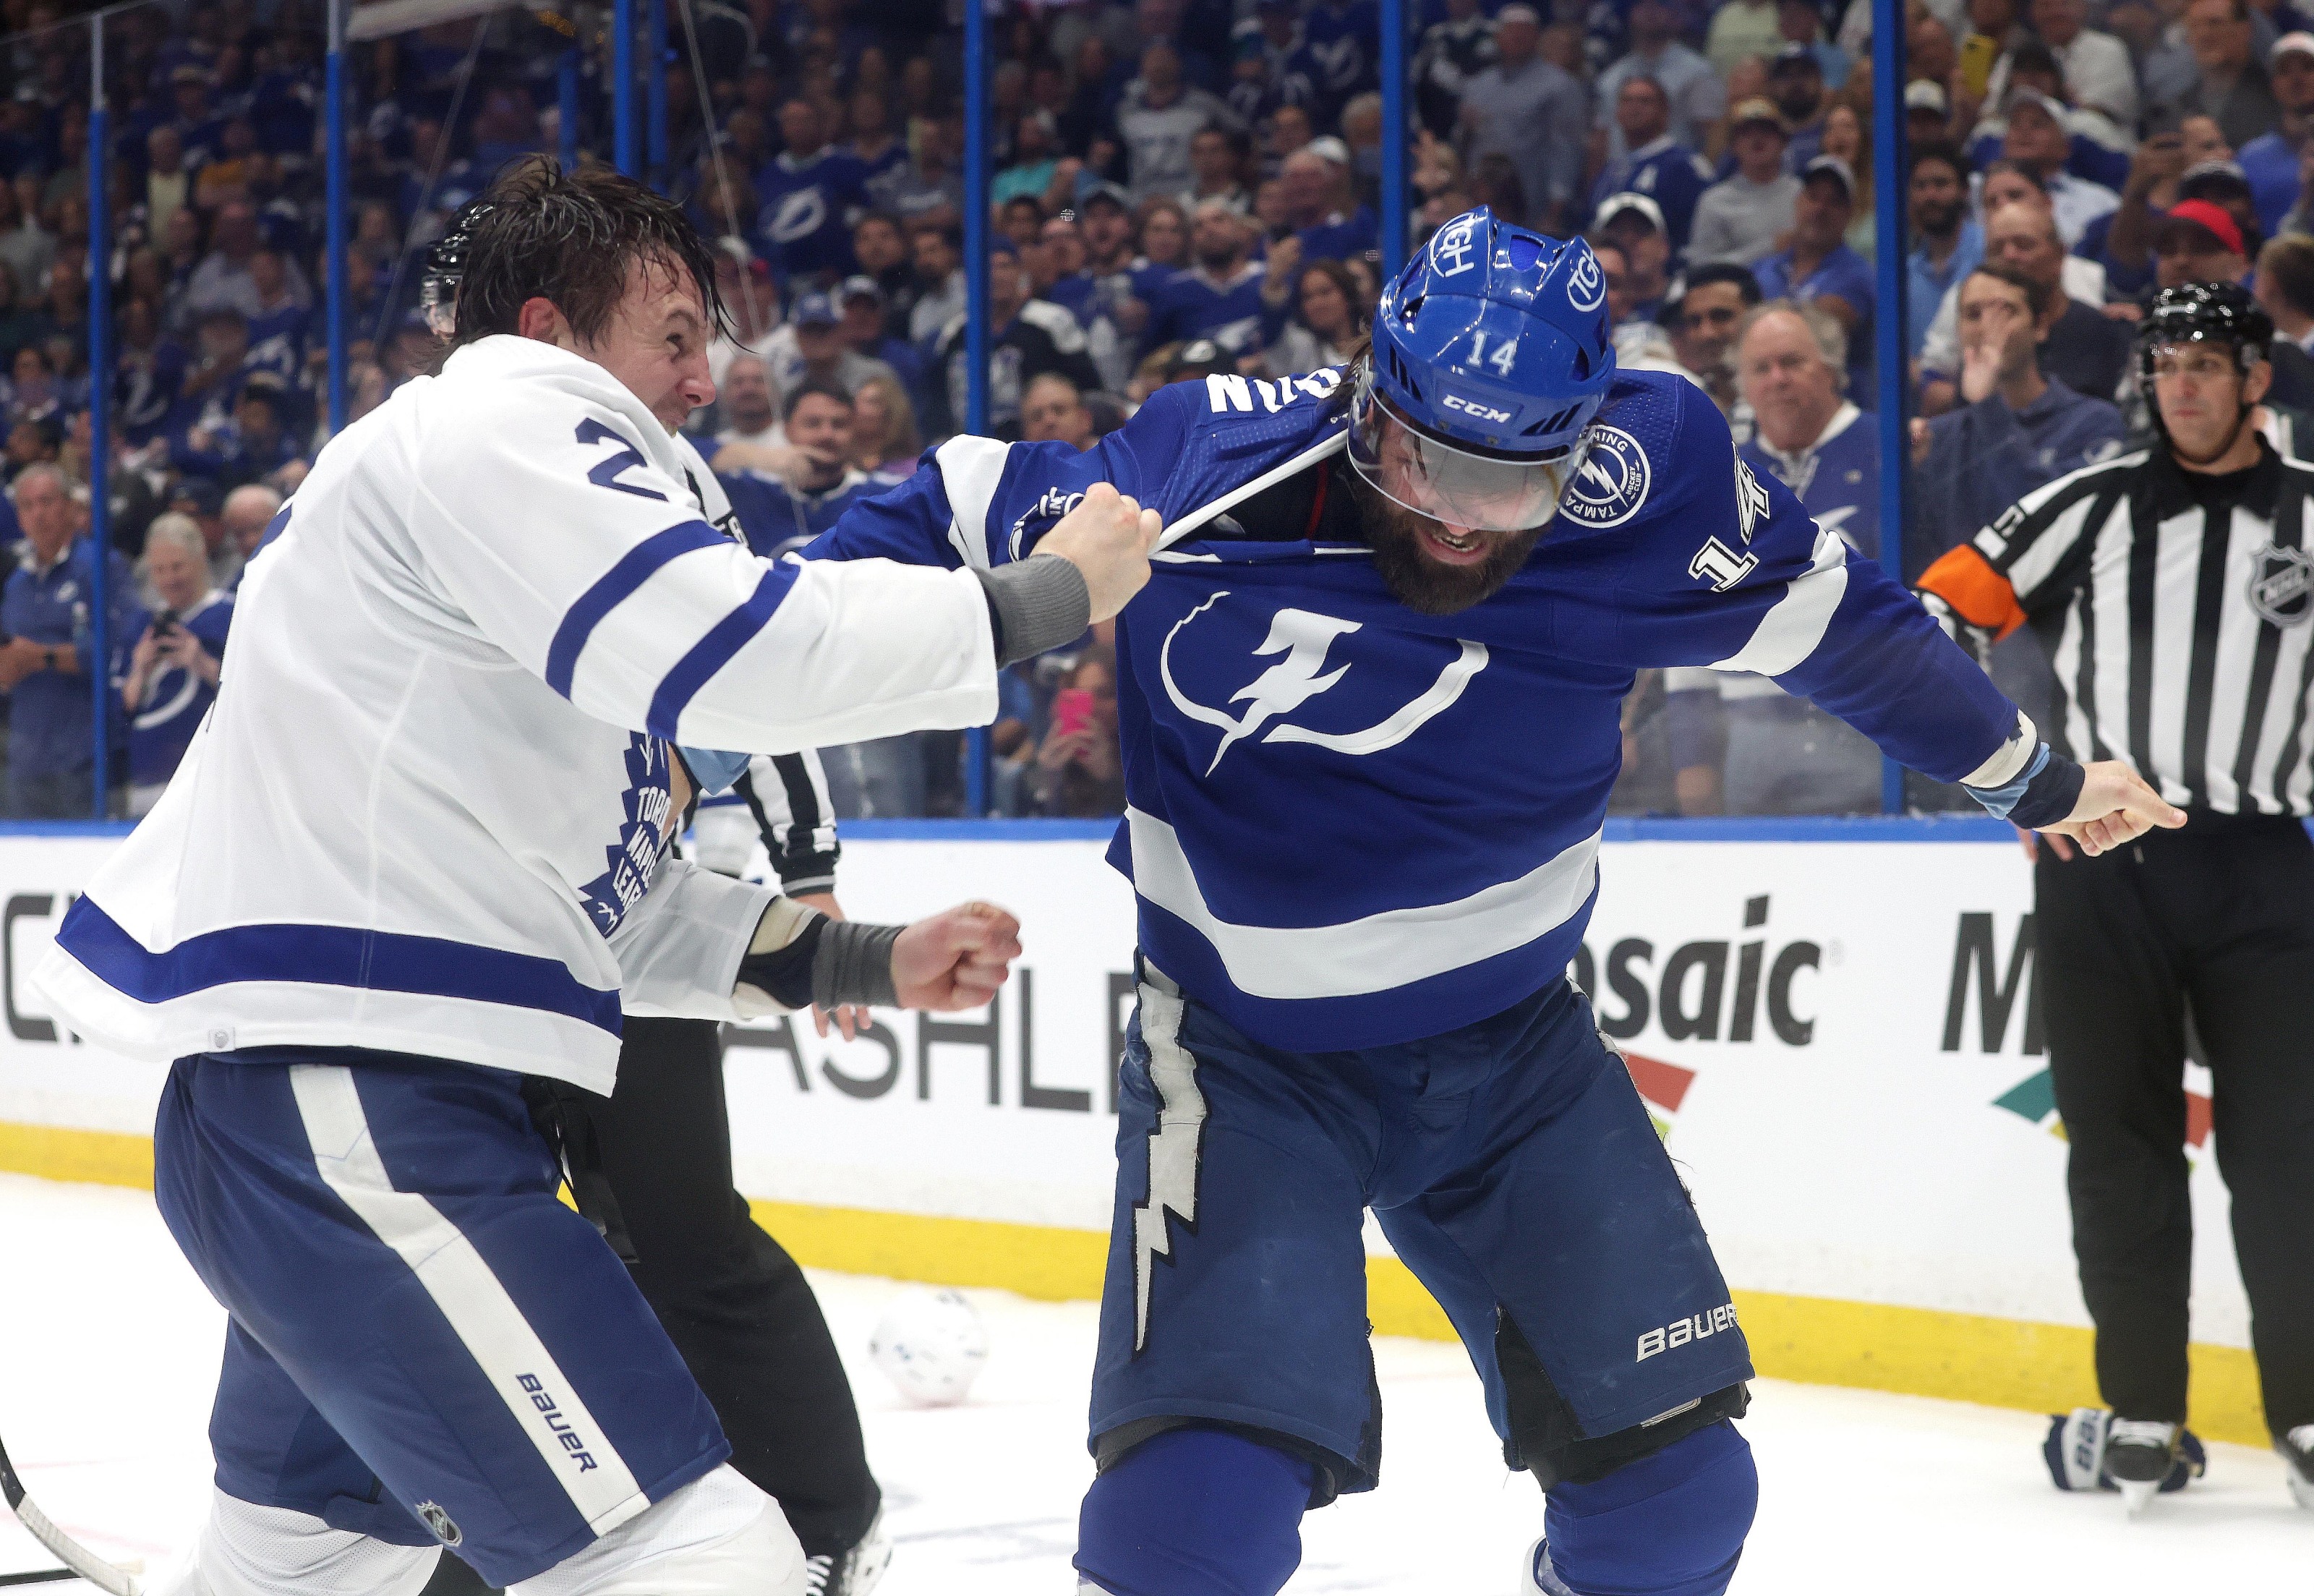 Toronto Maple Leafs: The NHL Needs an Officiating Overhaul